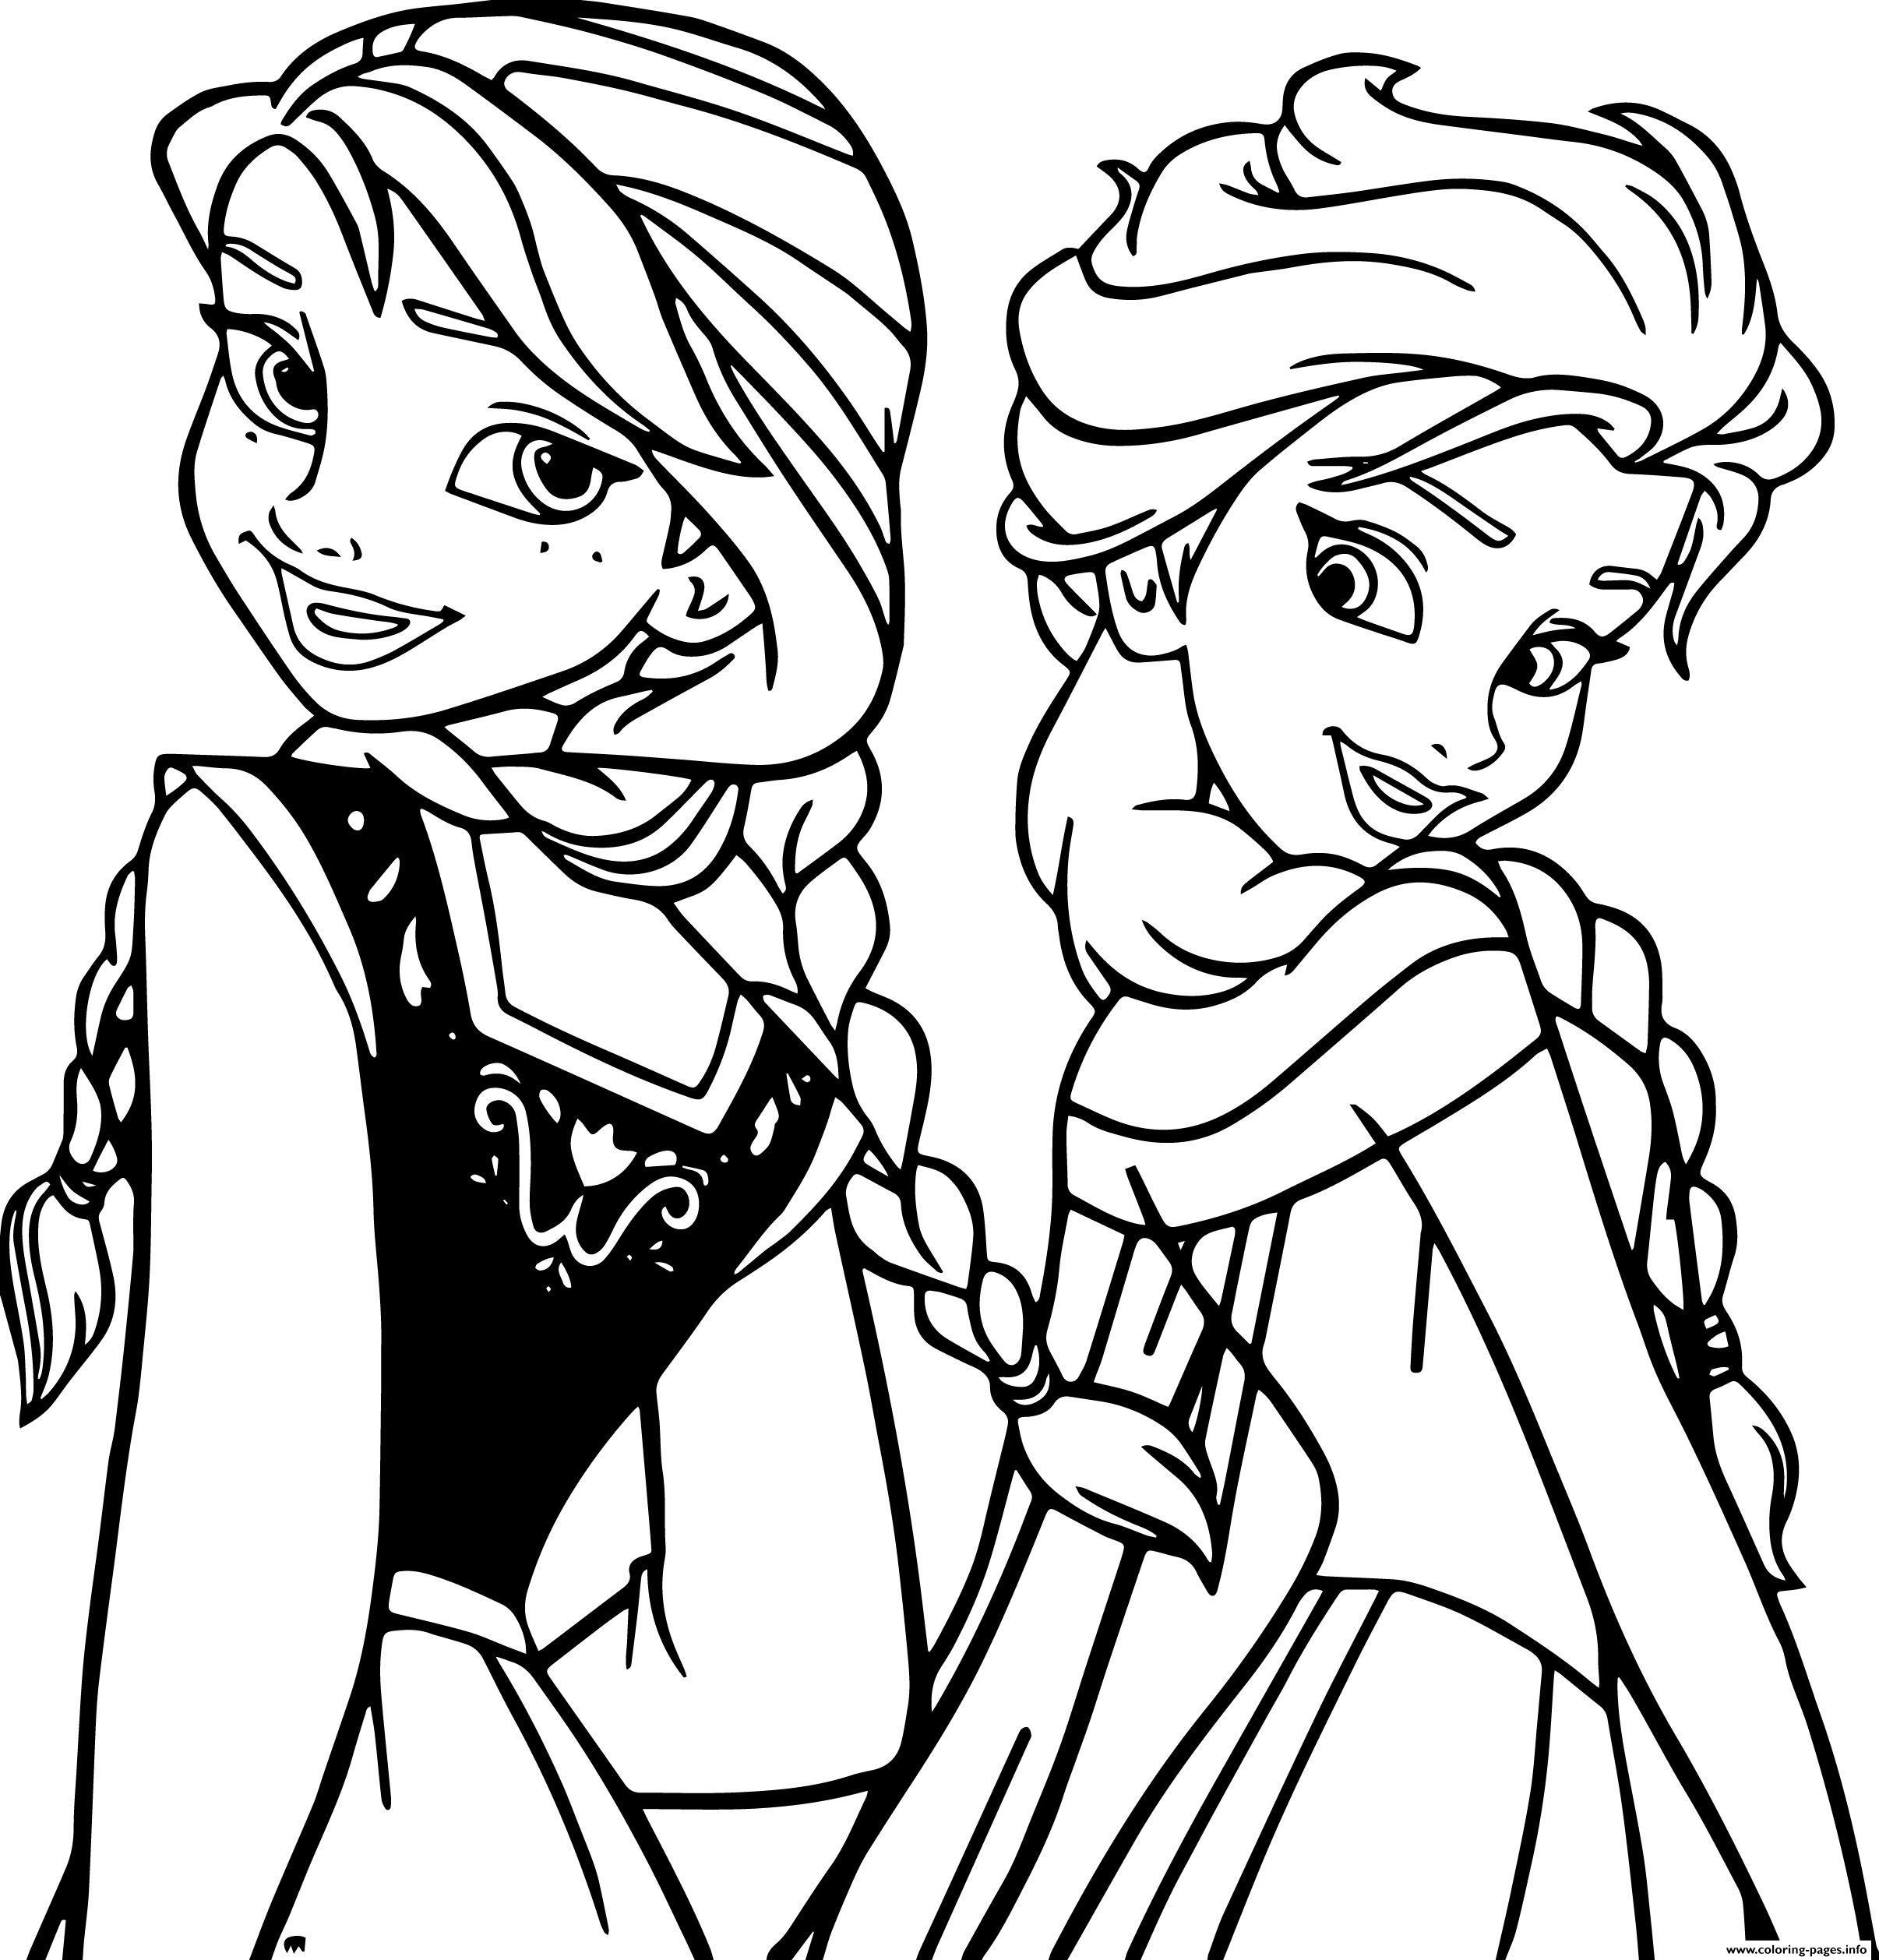 Coloring Pages For Girls Frozen Frozen For Girls Coloring Pages Printable